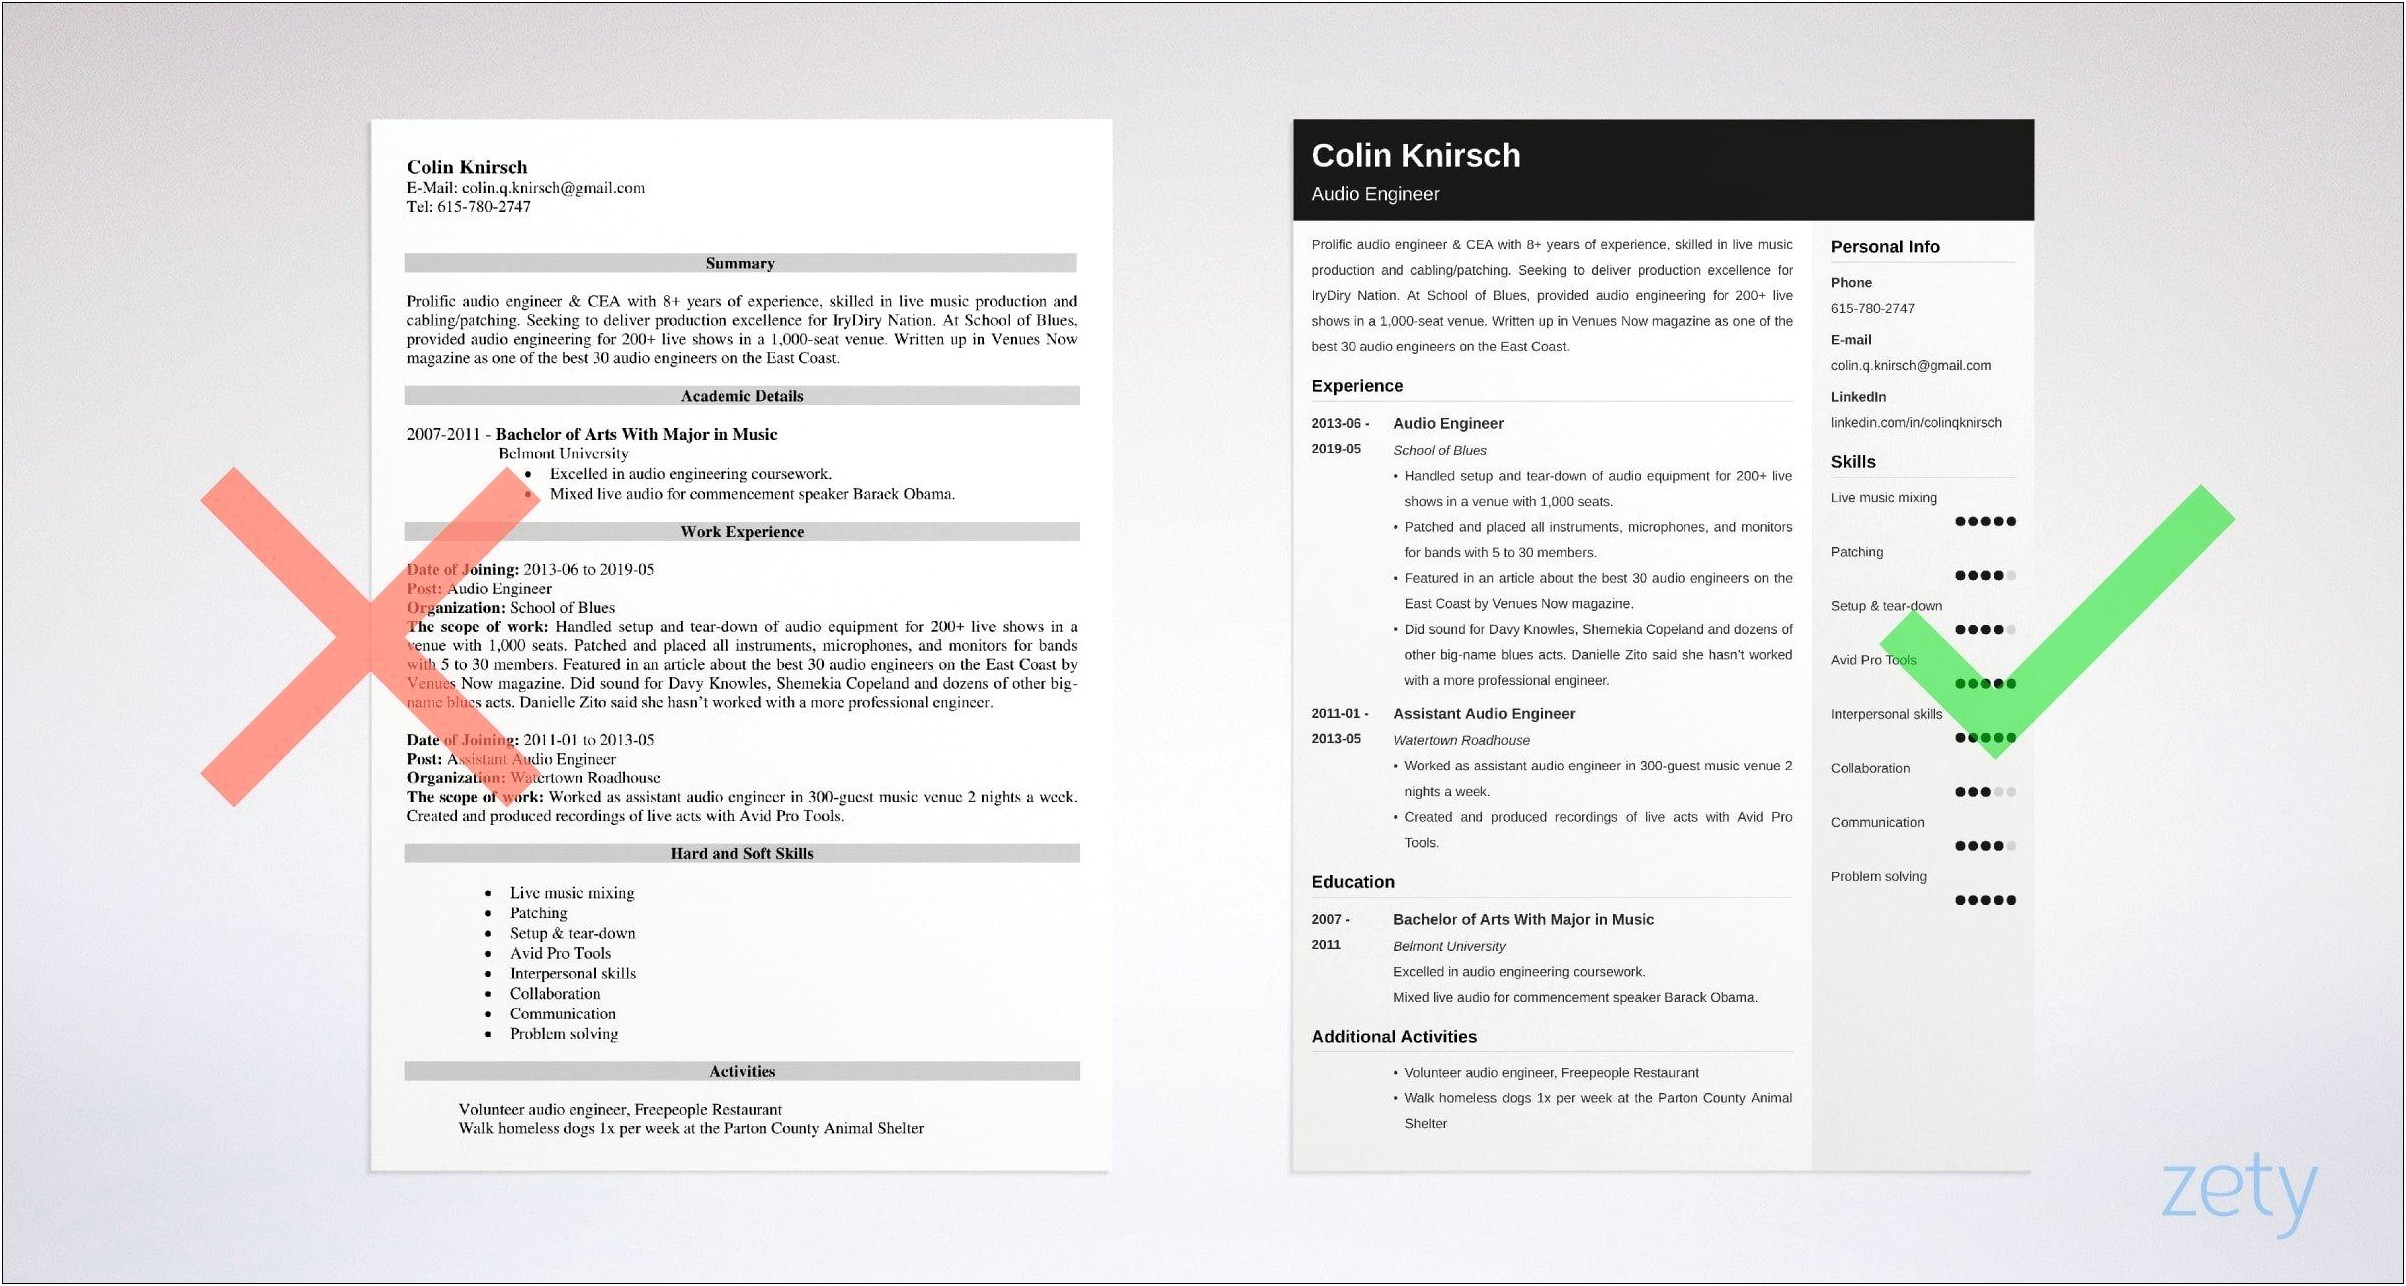 Sound Engineer Audio Mixer Cover Letter Resume